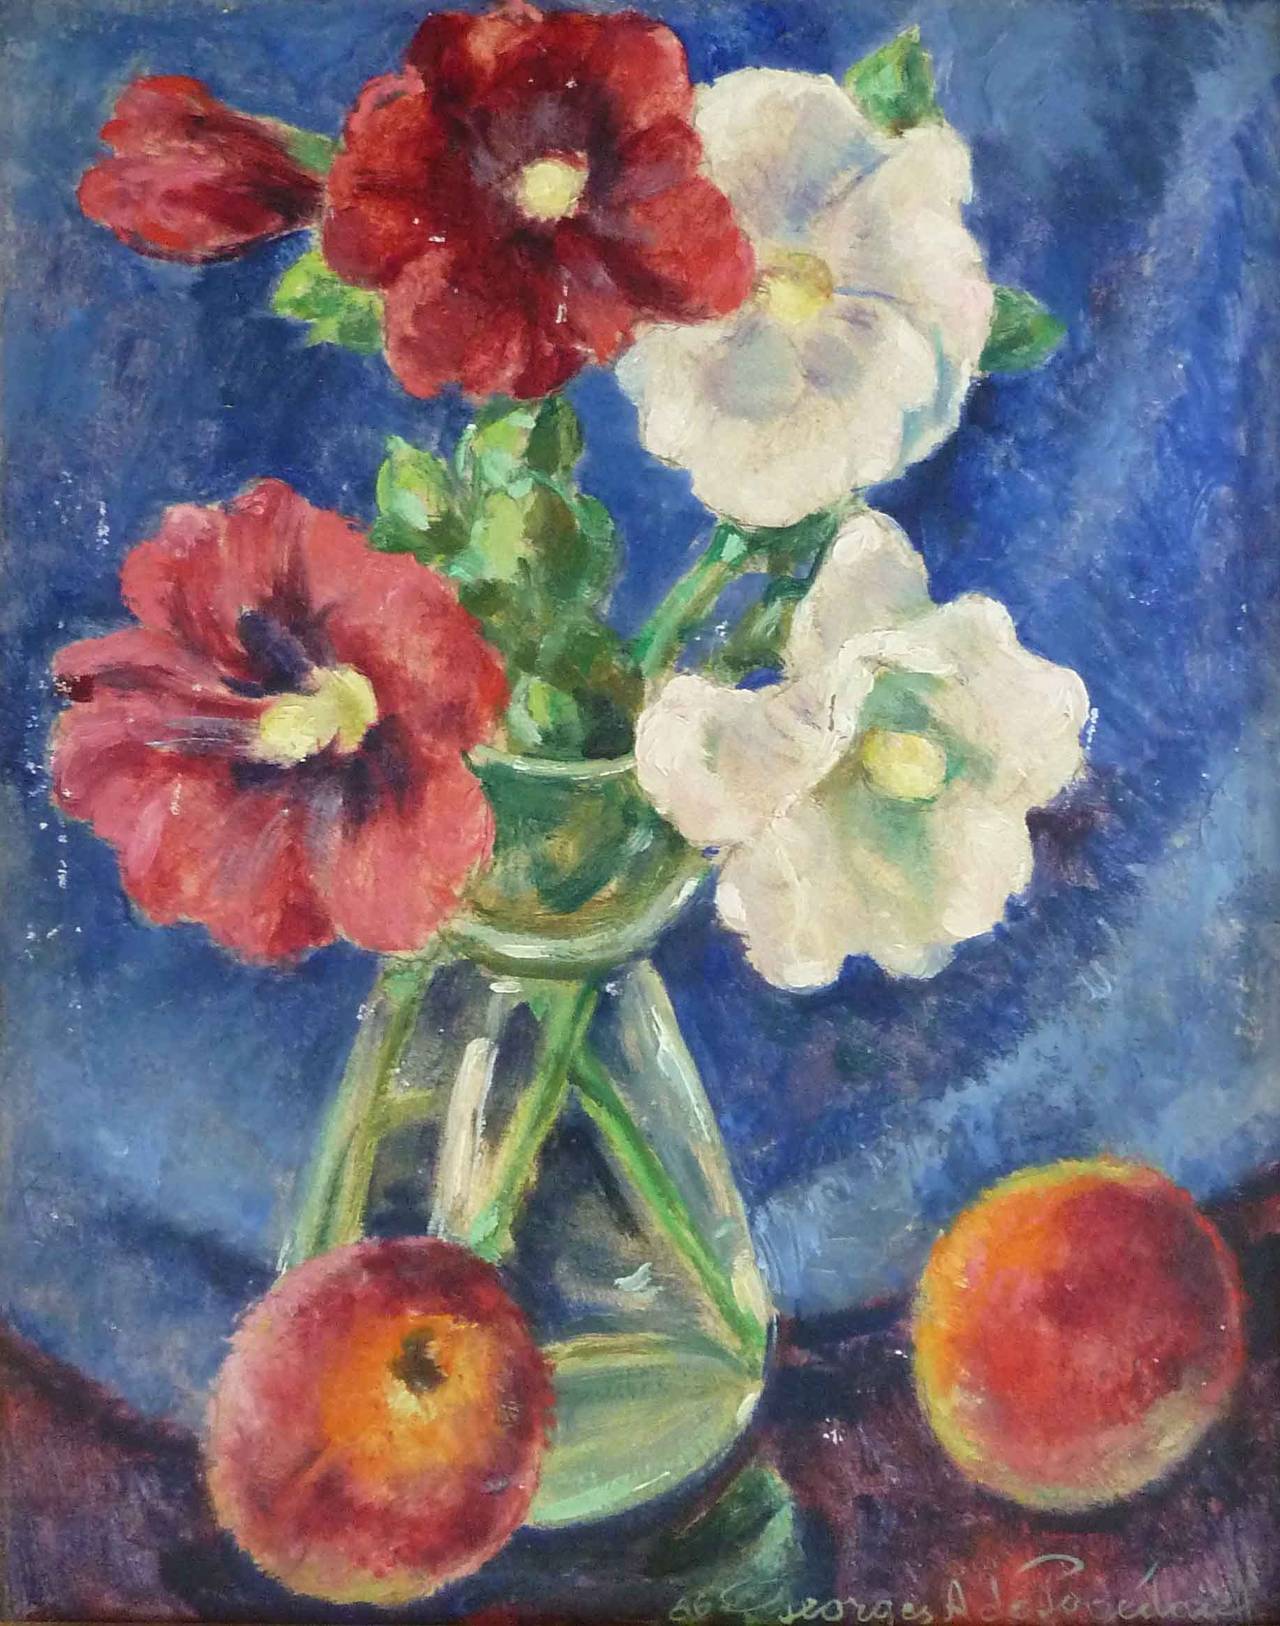 Five Hollyhocks and Two Peaches - Painting by Georges Anatolovitch de Pogedaieff